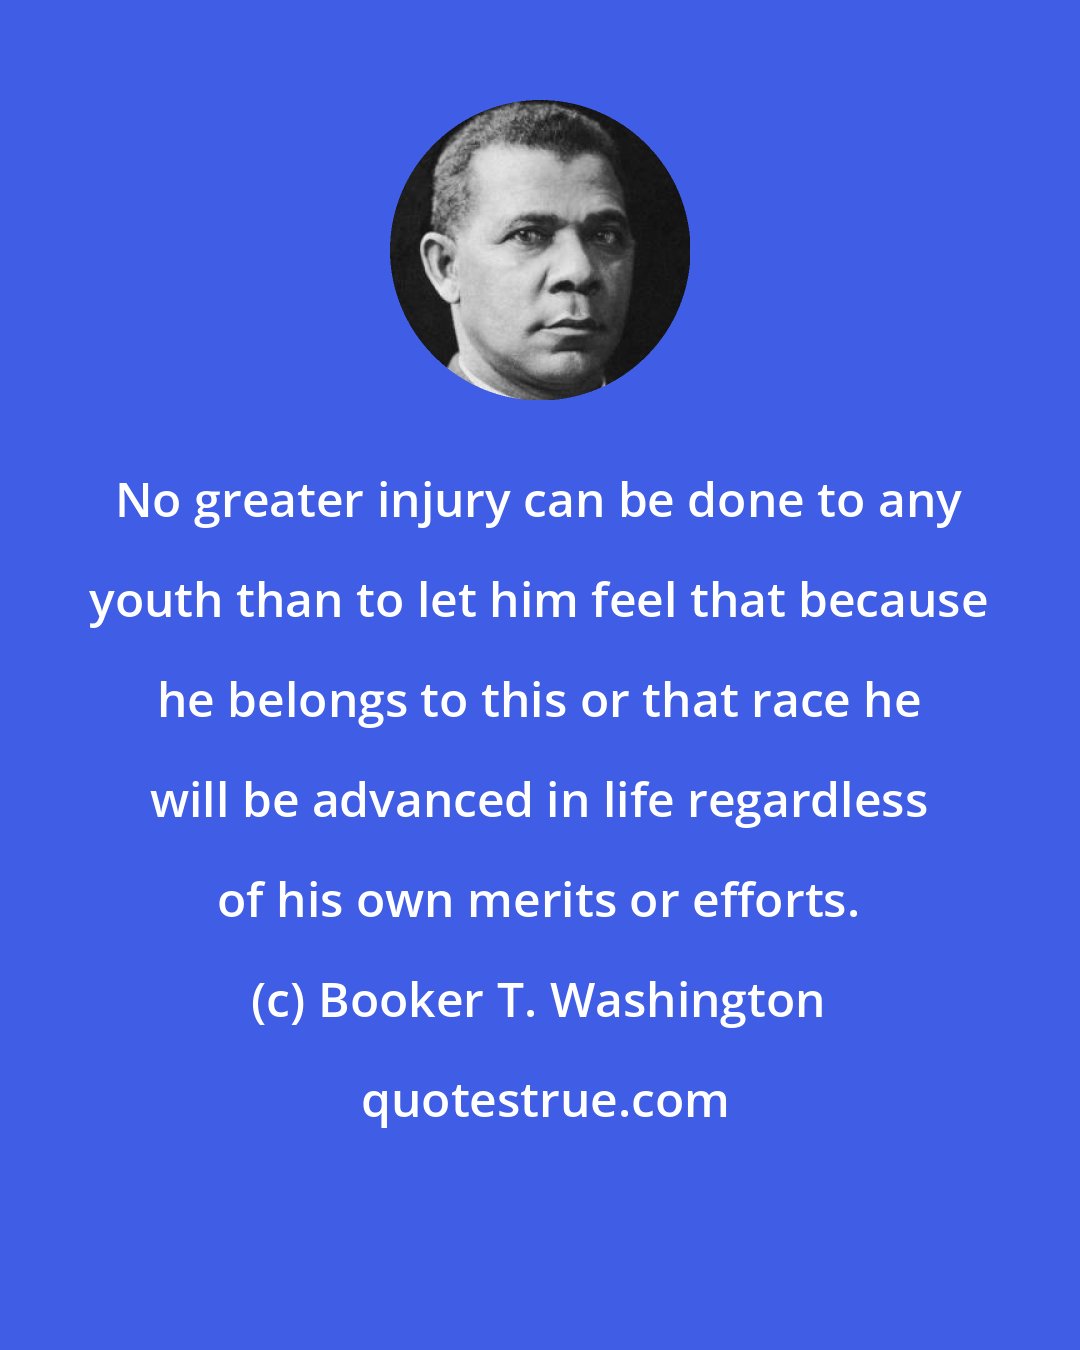 Booker T. Washington: No greater injury can be done to any youth than to let him feel that because he belongs to this or that race he will be advanced in life regardless of his own merits or efforts.